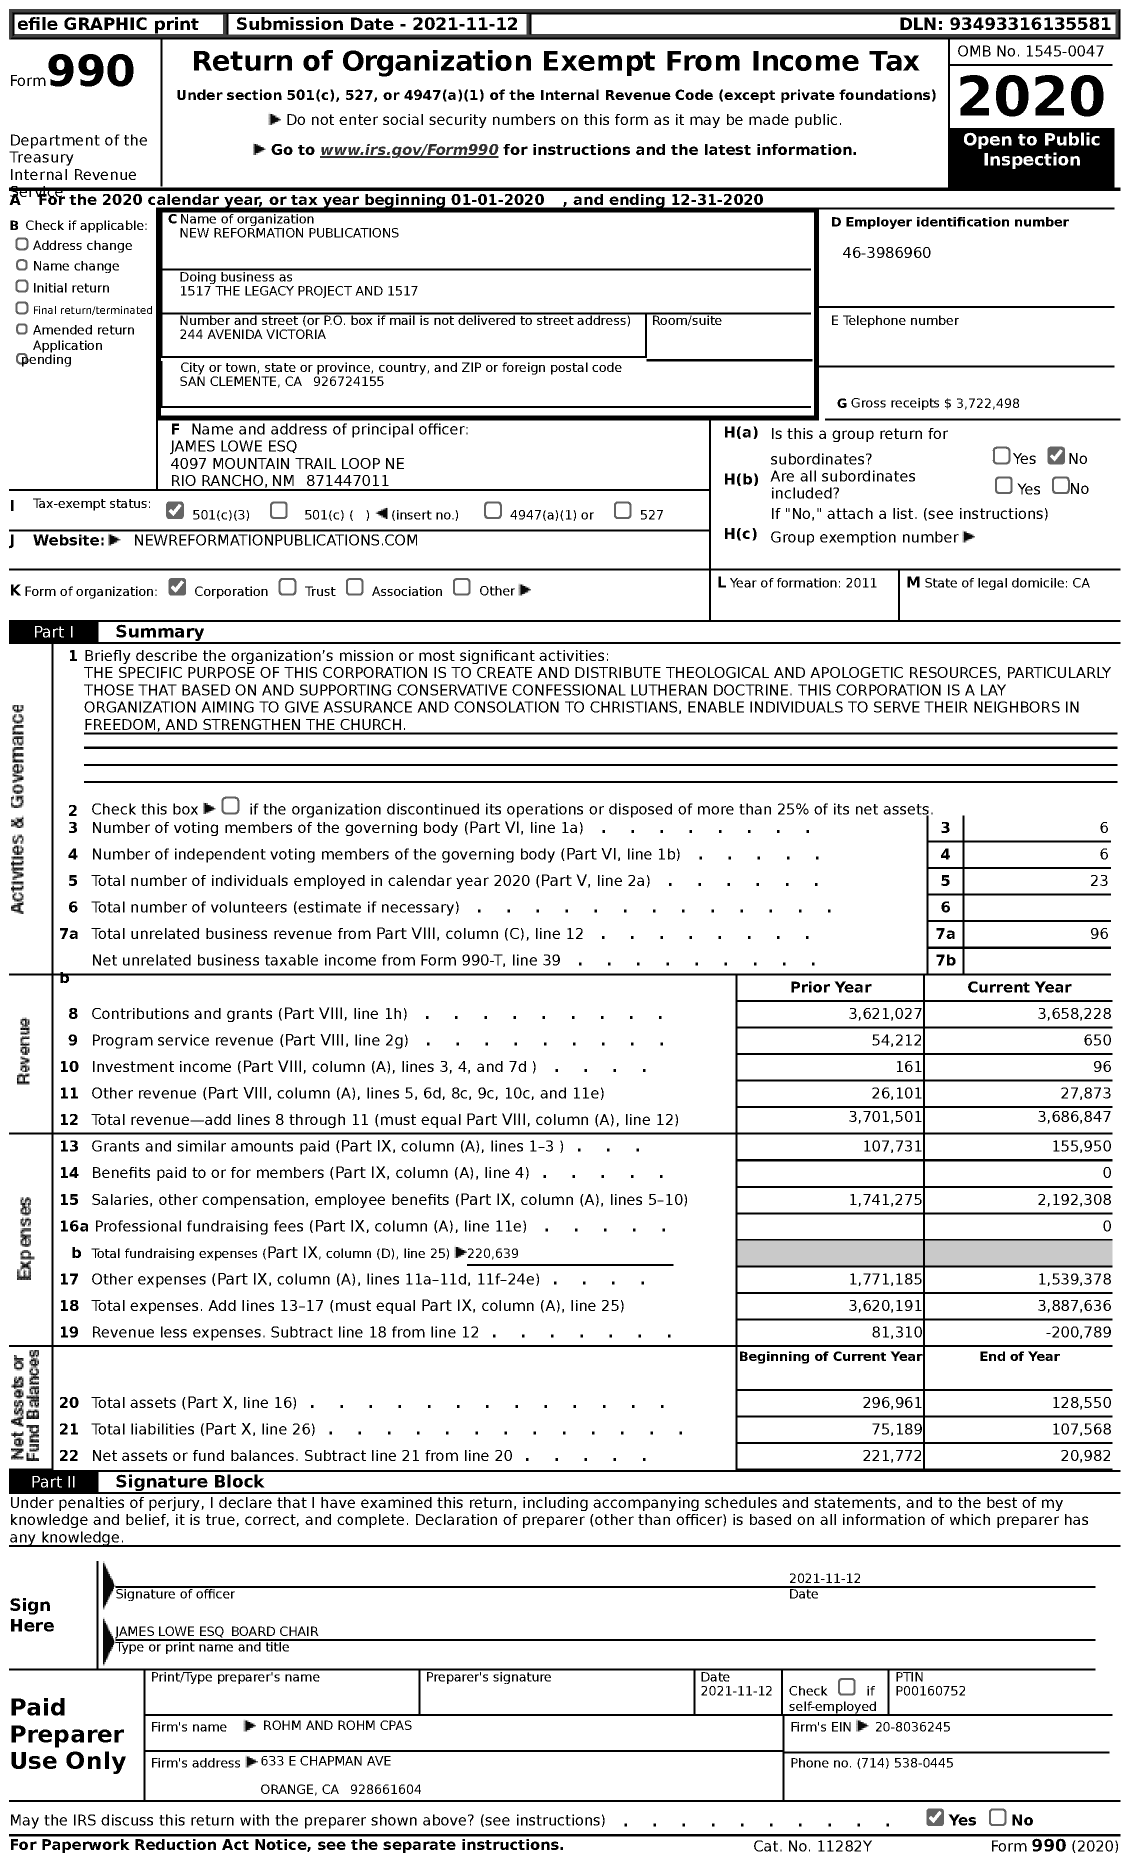 Image of first page of 2020 Form 990 for 1517 the Legacy Project and 1517